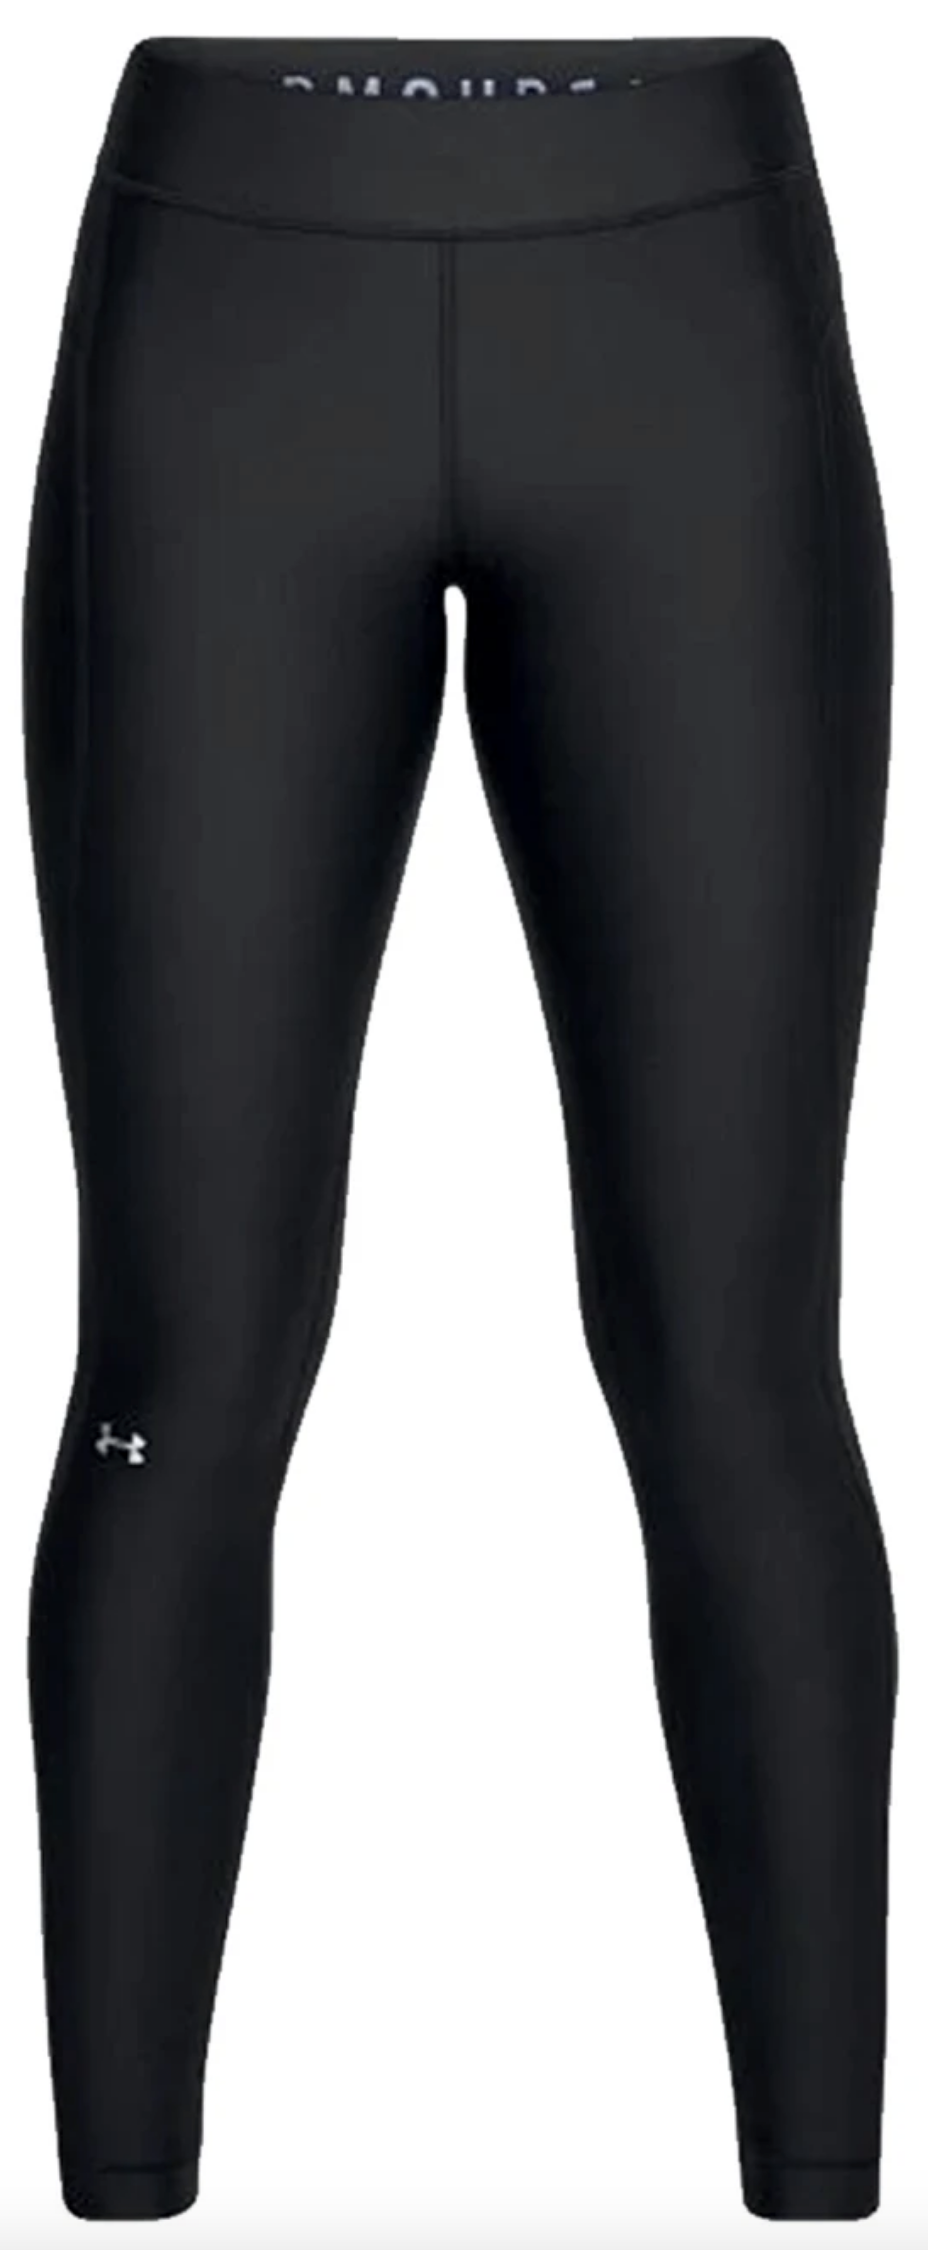 https://www.totalfootballdirect.com/Cache/Images/Under-Armour-Womens-Heatgear-Leggings-Black.png